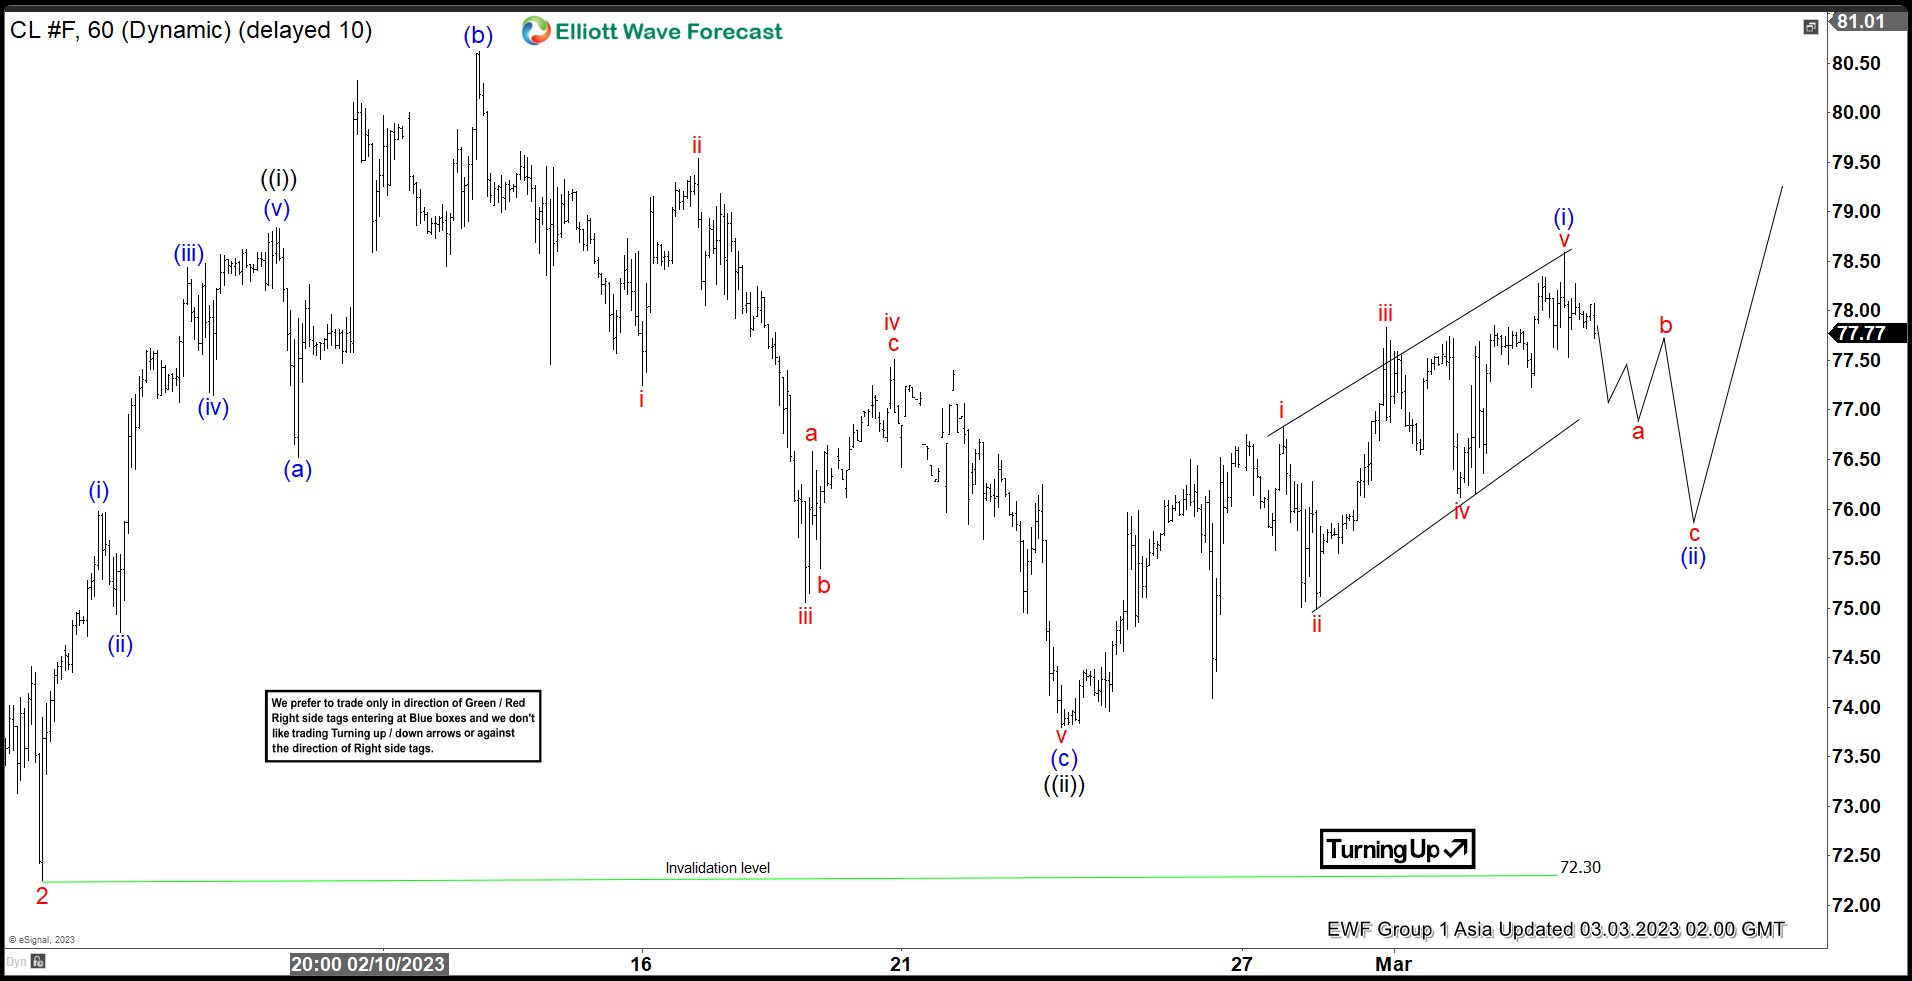 Elliott Wave View: Sideways Price Action in Oil (CL) May Resolve to the Upside